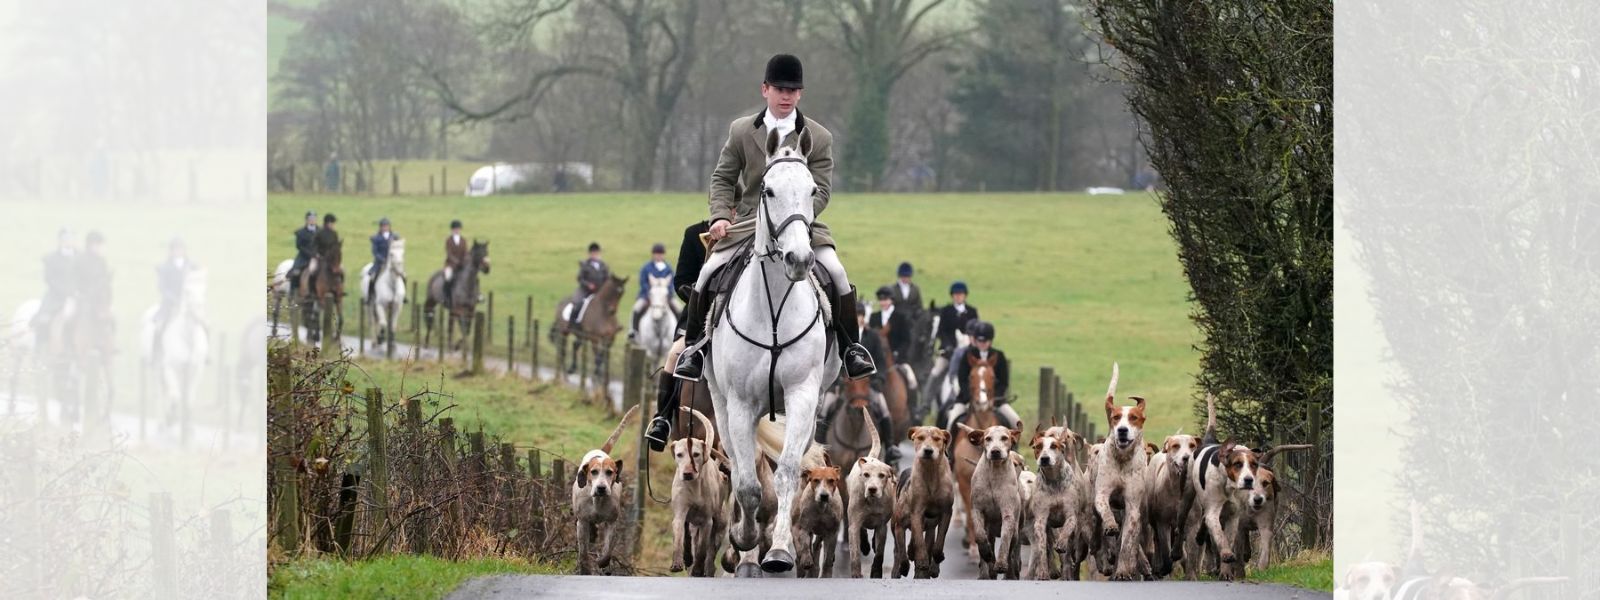 Anti-hunting groups ecstatic over new Scottish law banning use of dogs in hunts